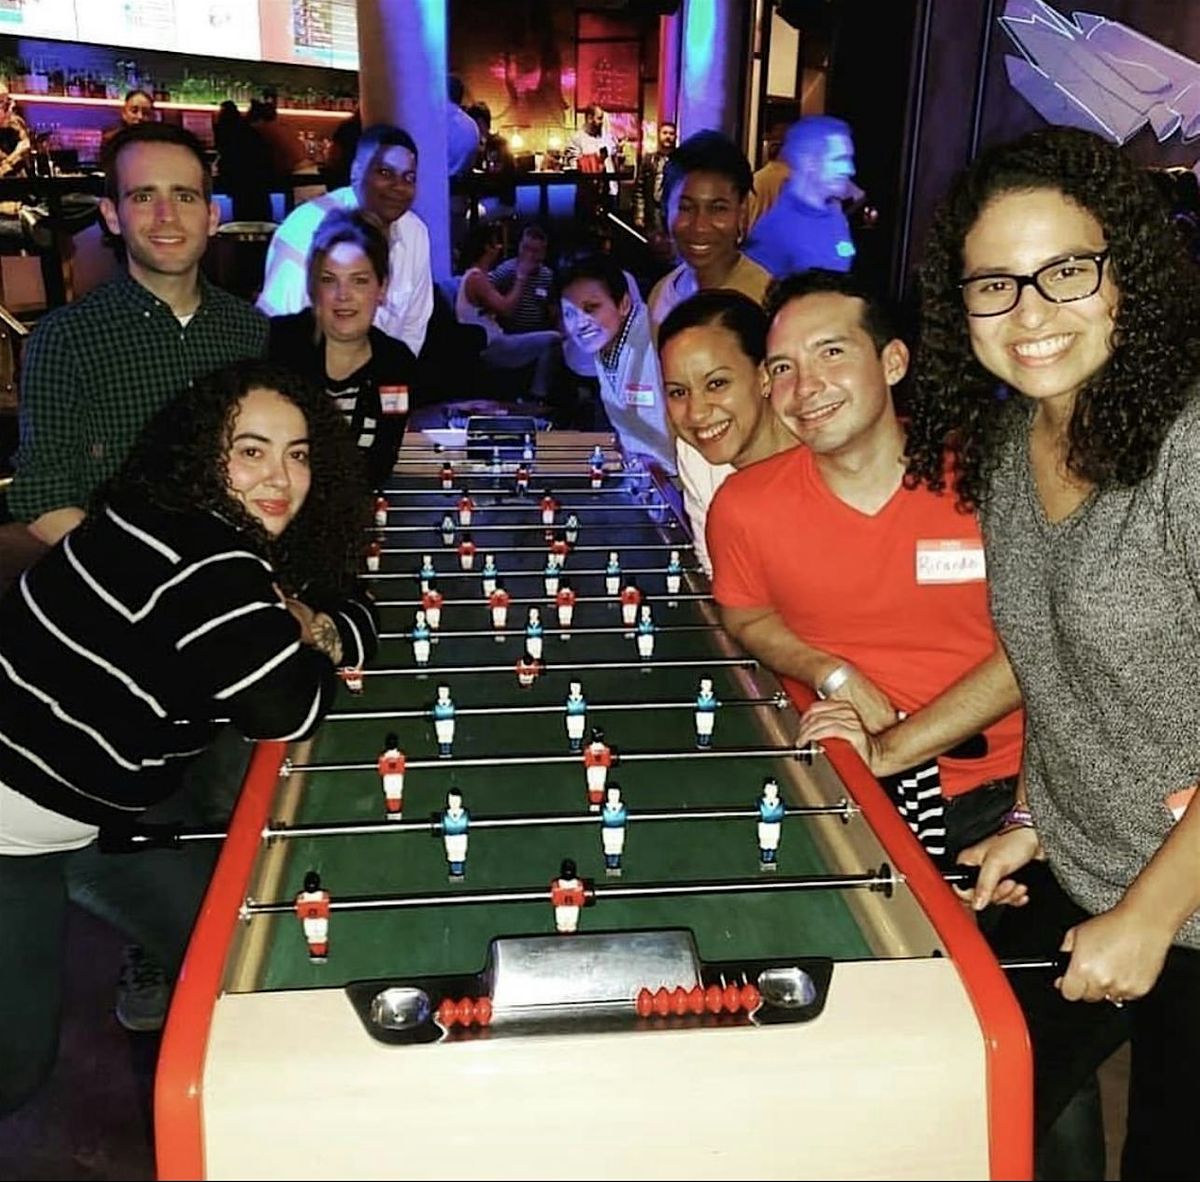 Queer Play: LGBTQ Happy Hour & Game Night